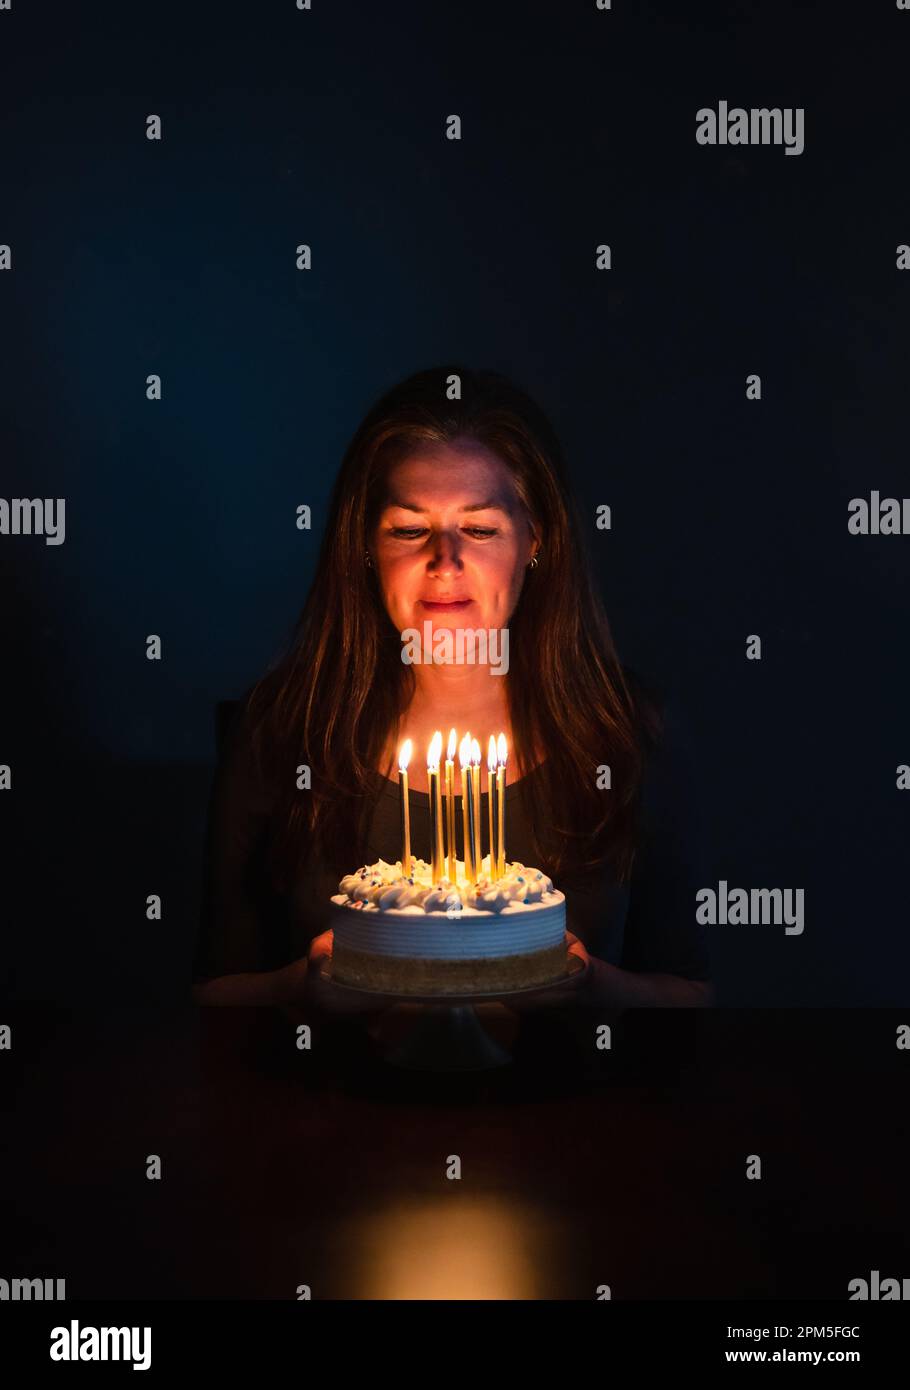 Attractive woman looking at candles on birthday cake in dark room. Stock Photo